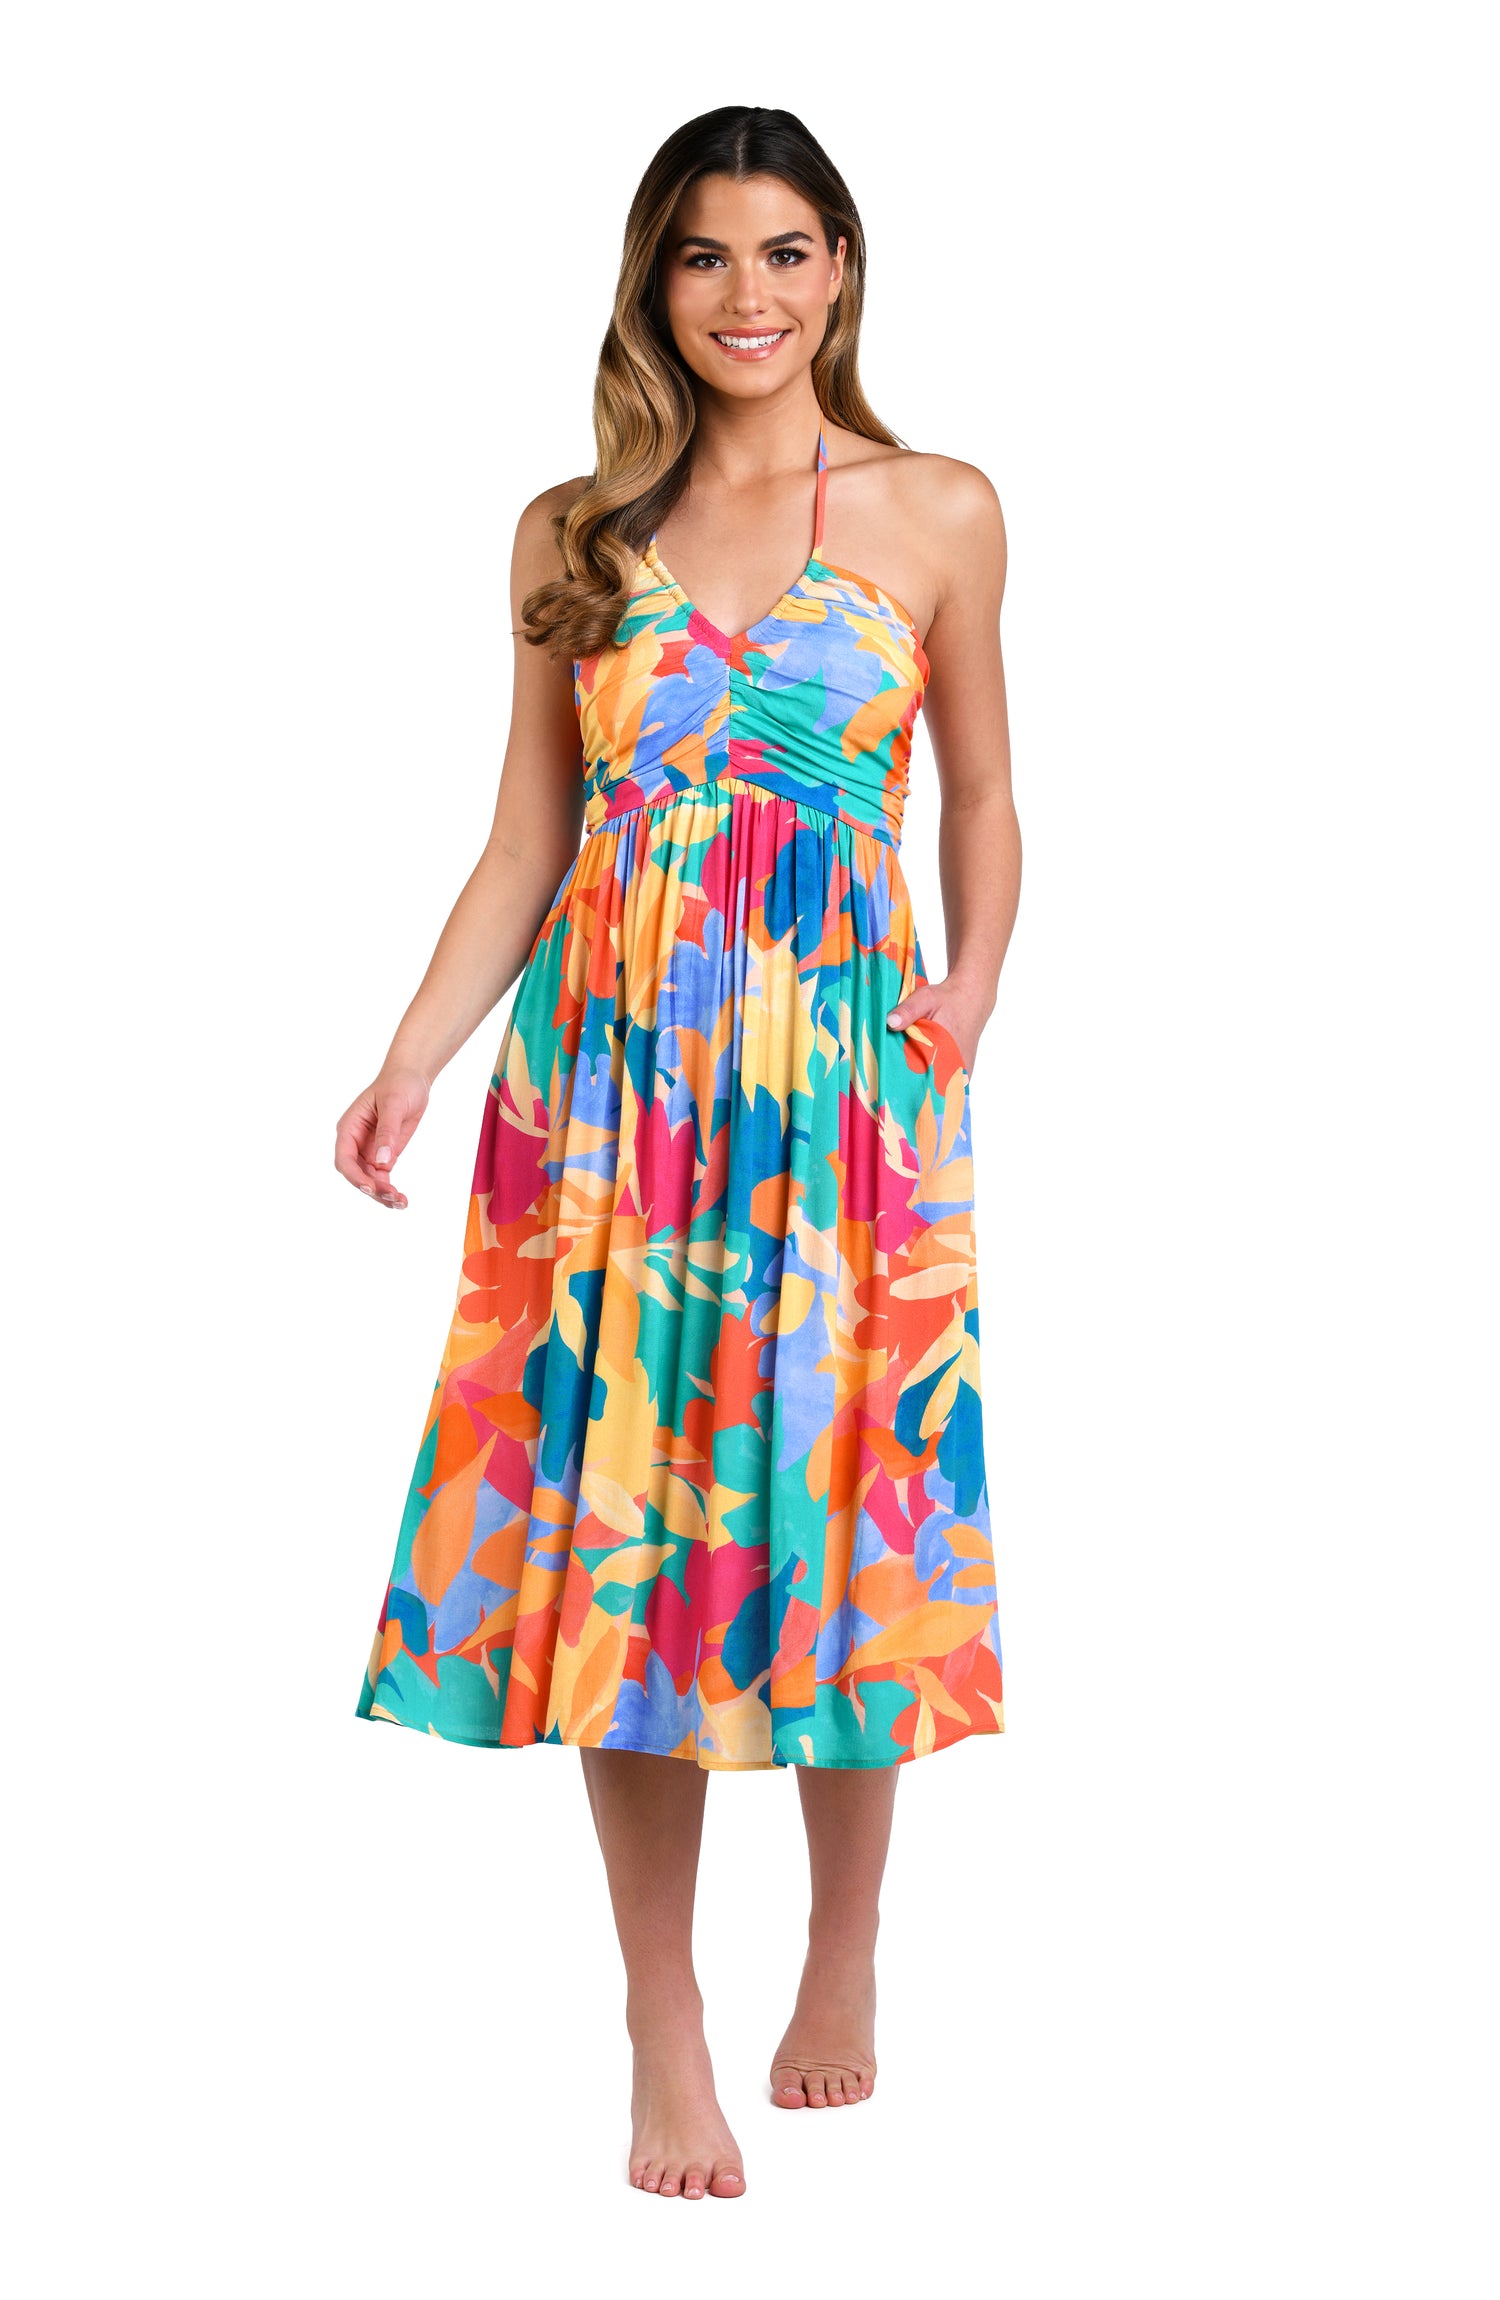 Model is wearing an orange, pink, blue, and aqua multicolored tropical patterned halter midi dress cover up.